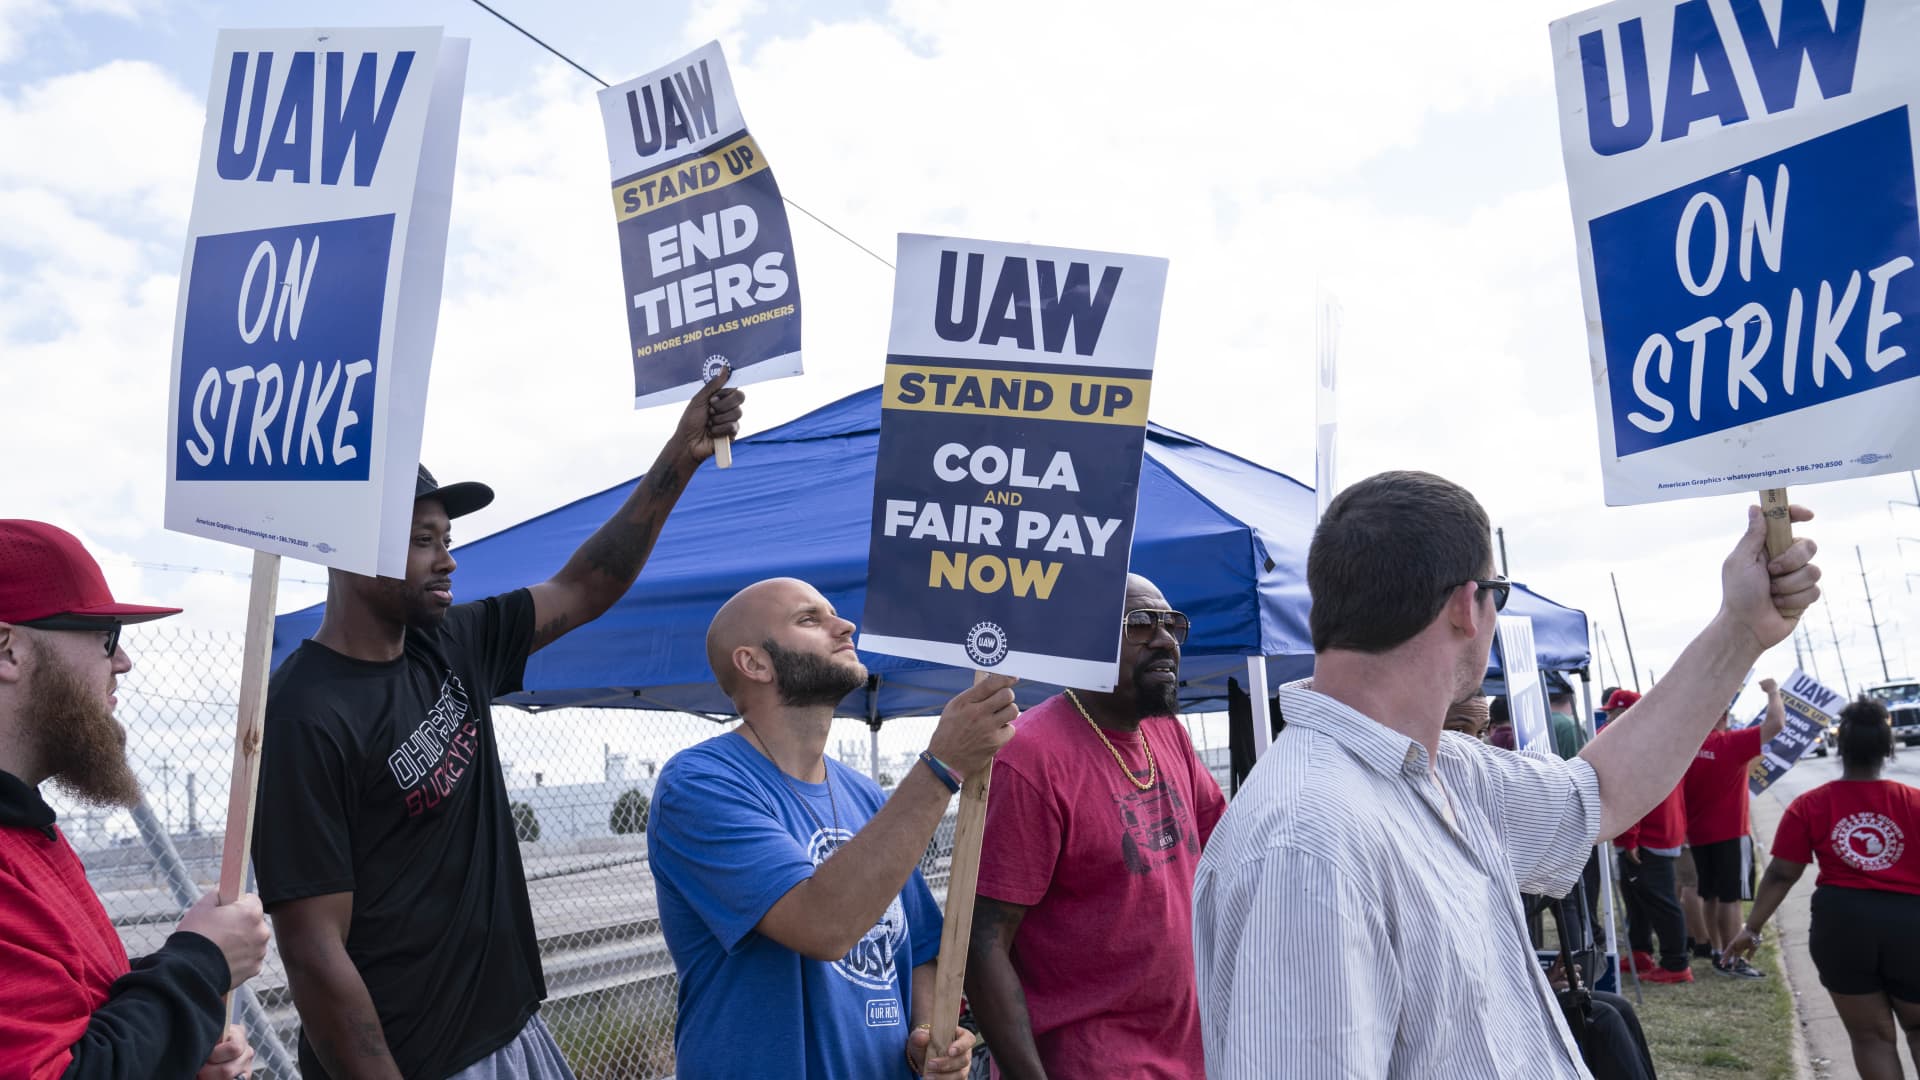 Where key issues stand as UAW closes in on extended strikes against GM, Ford and Stellantis